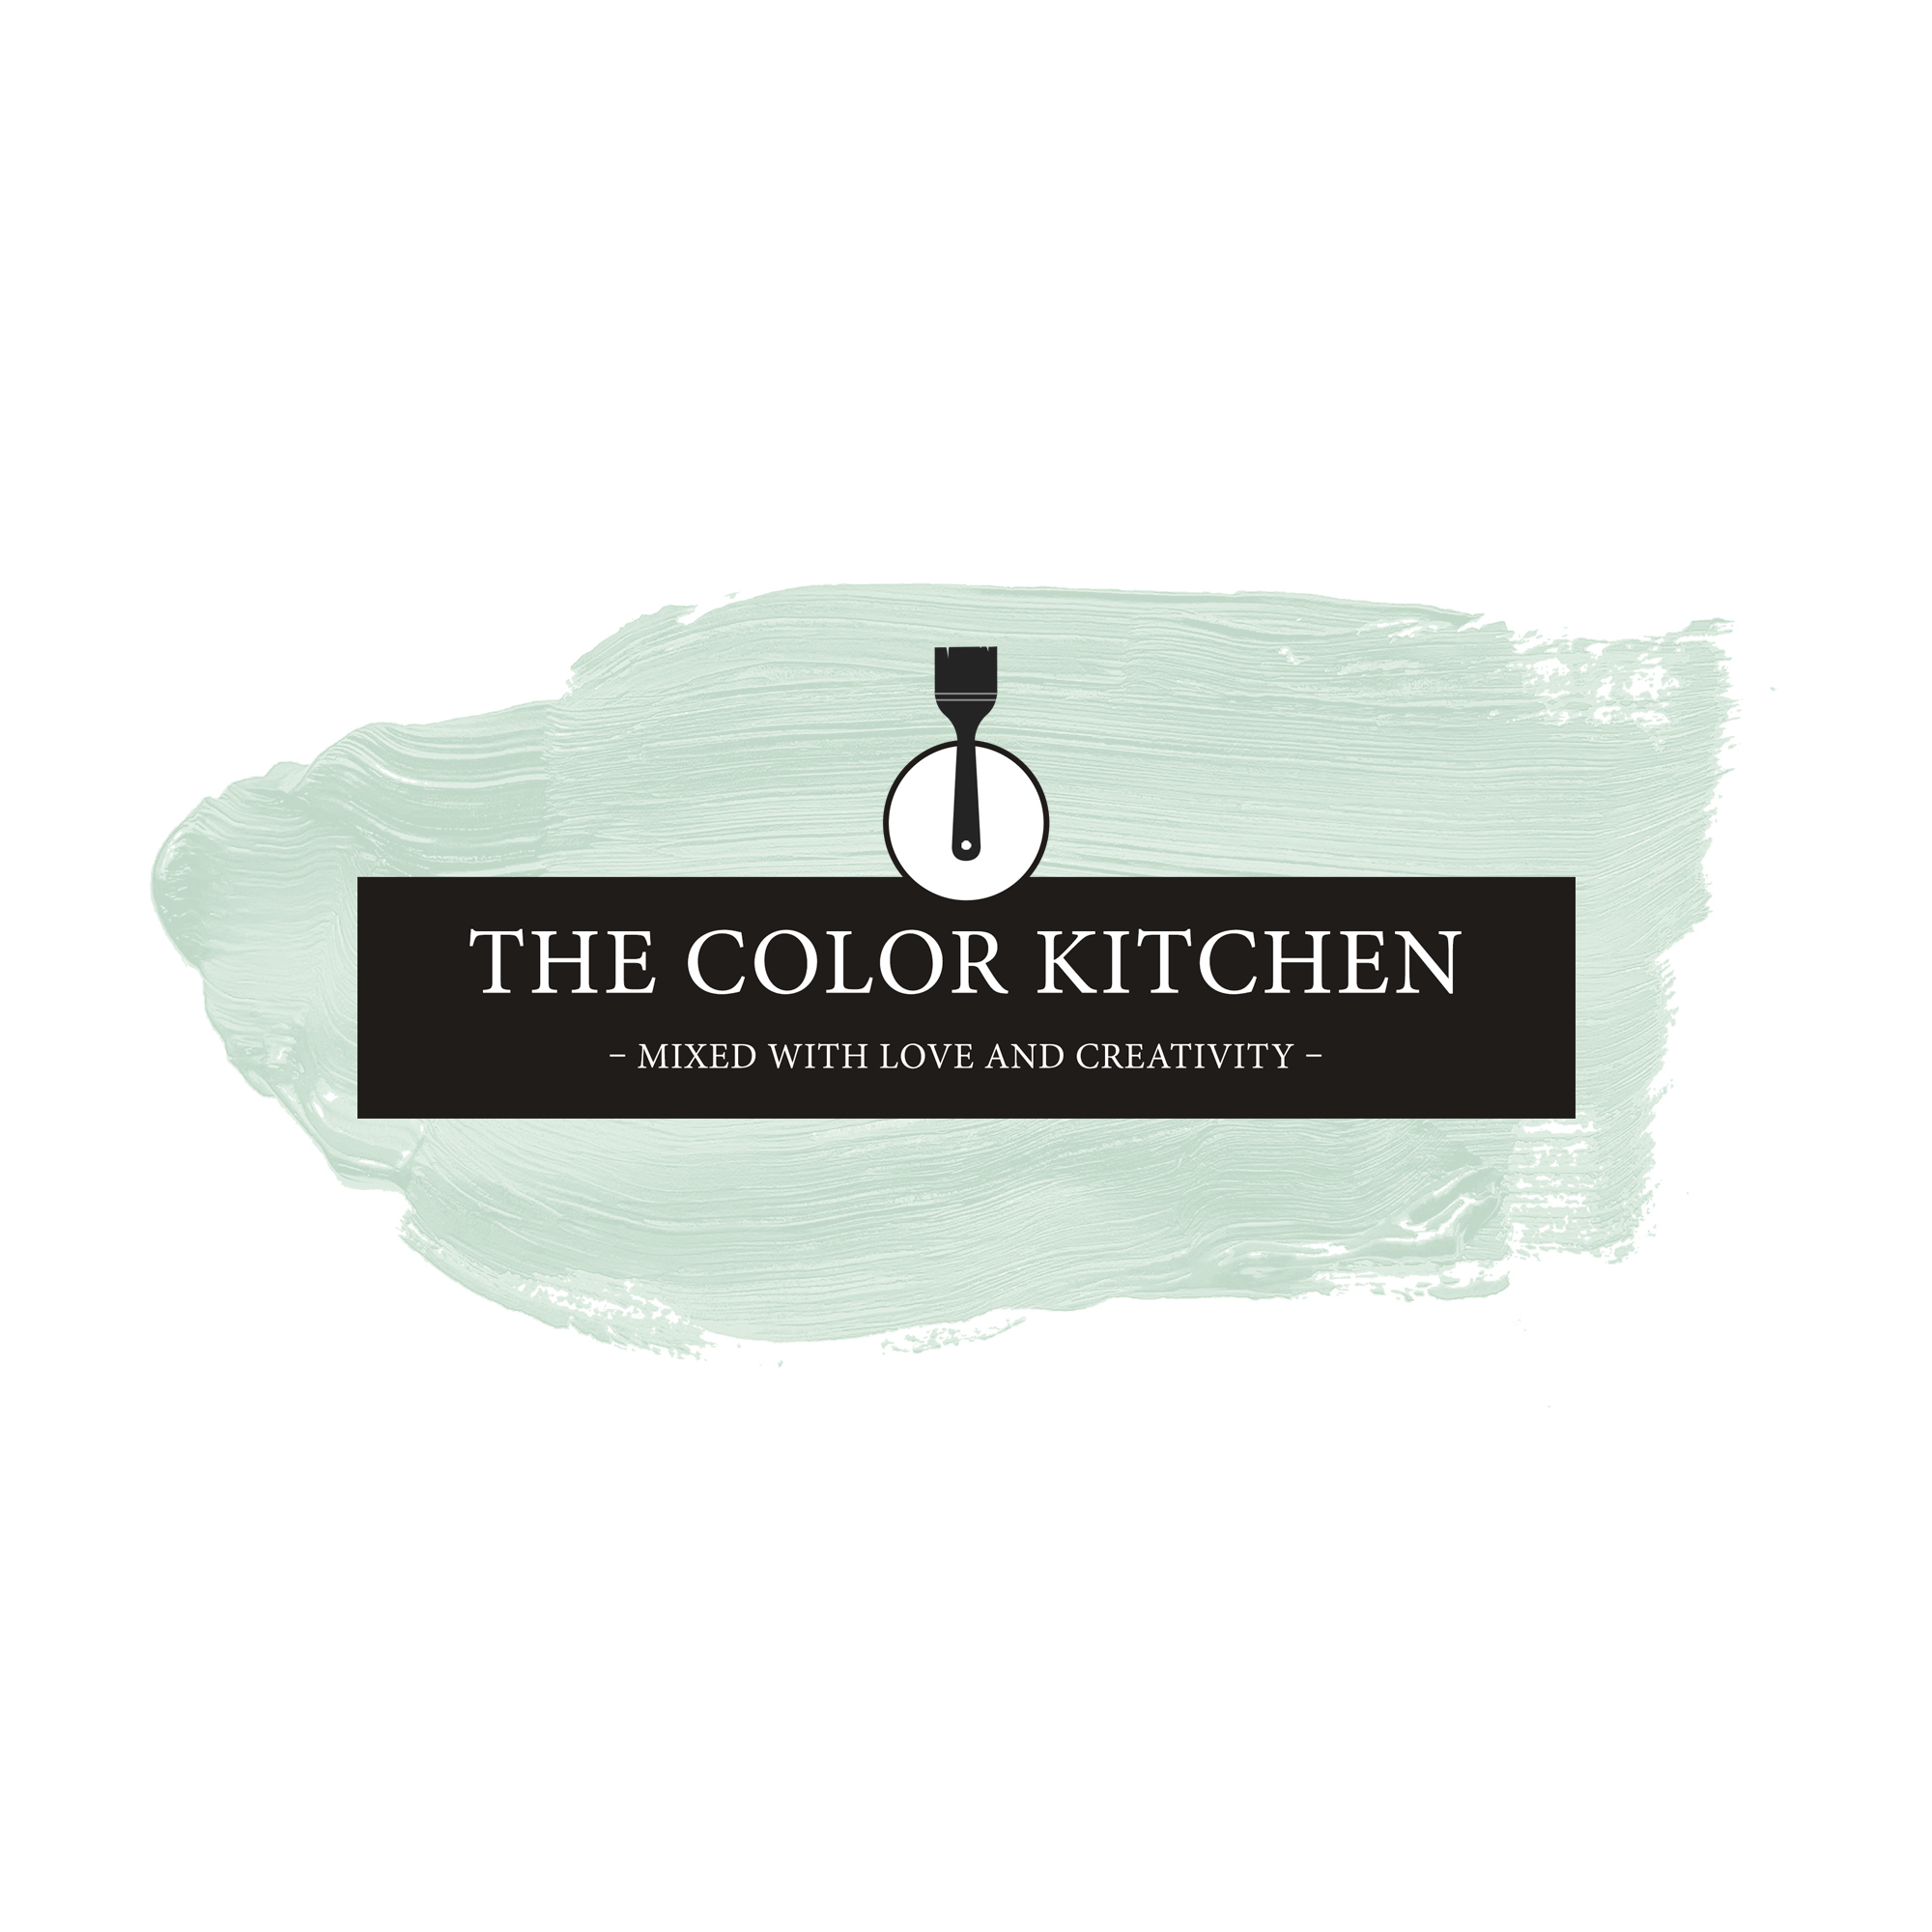 The Color Kitchen Perky Peppermint 2,5 l